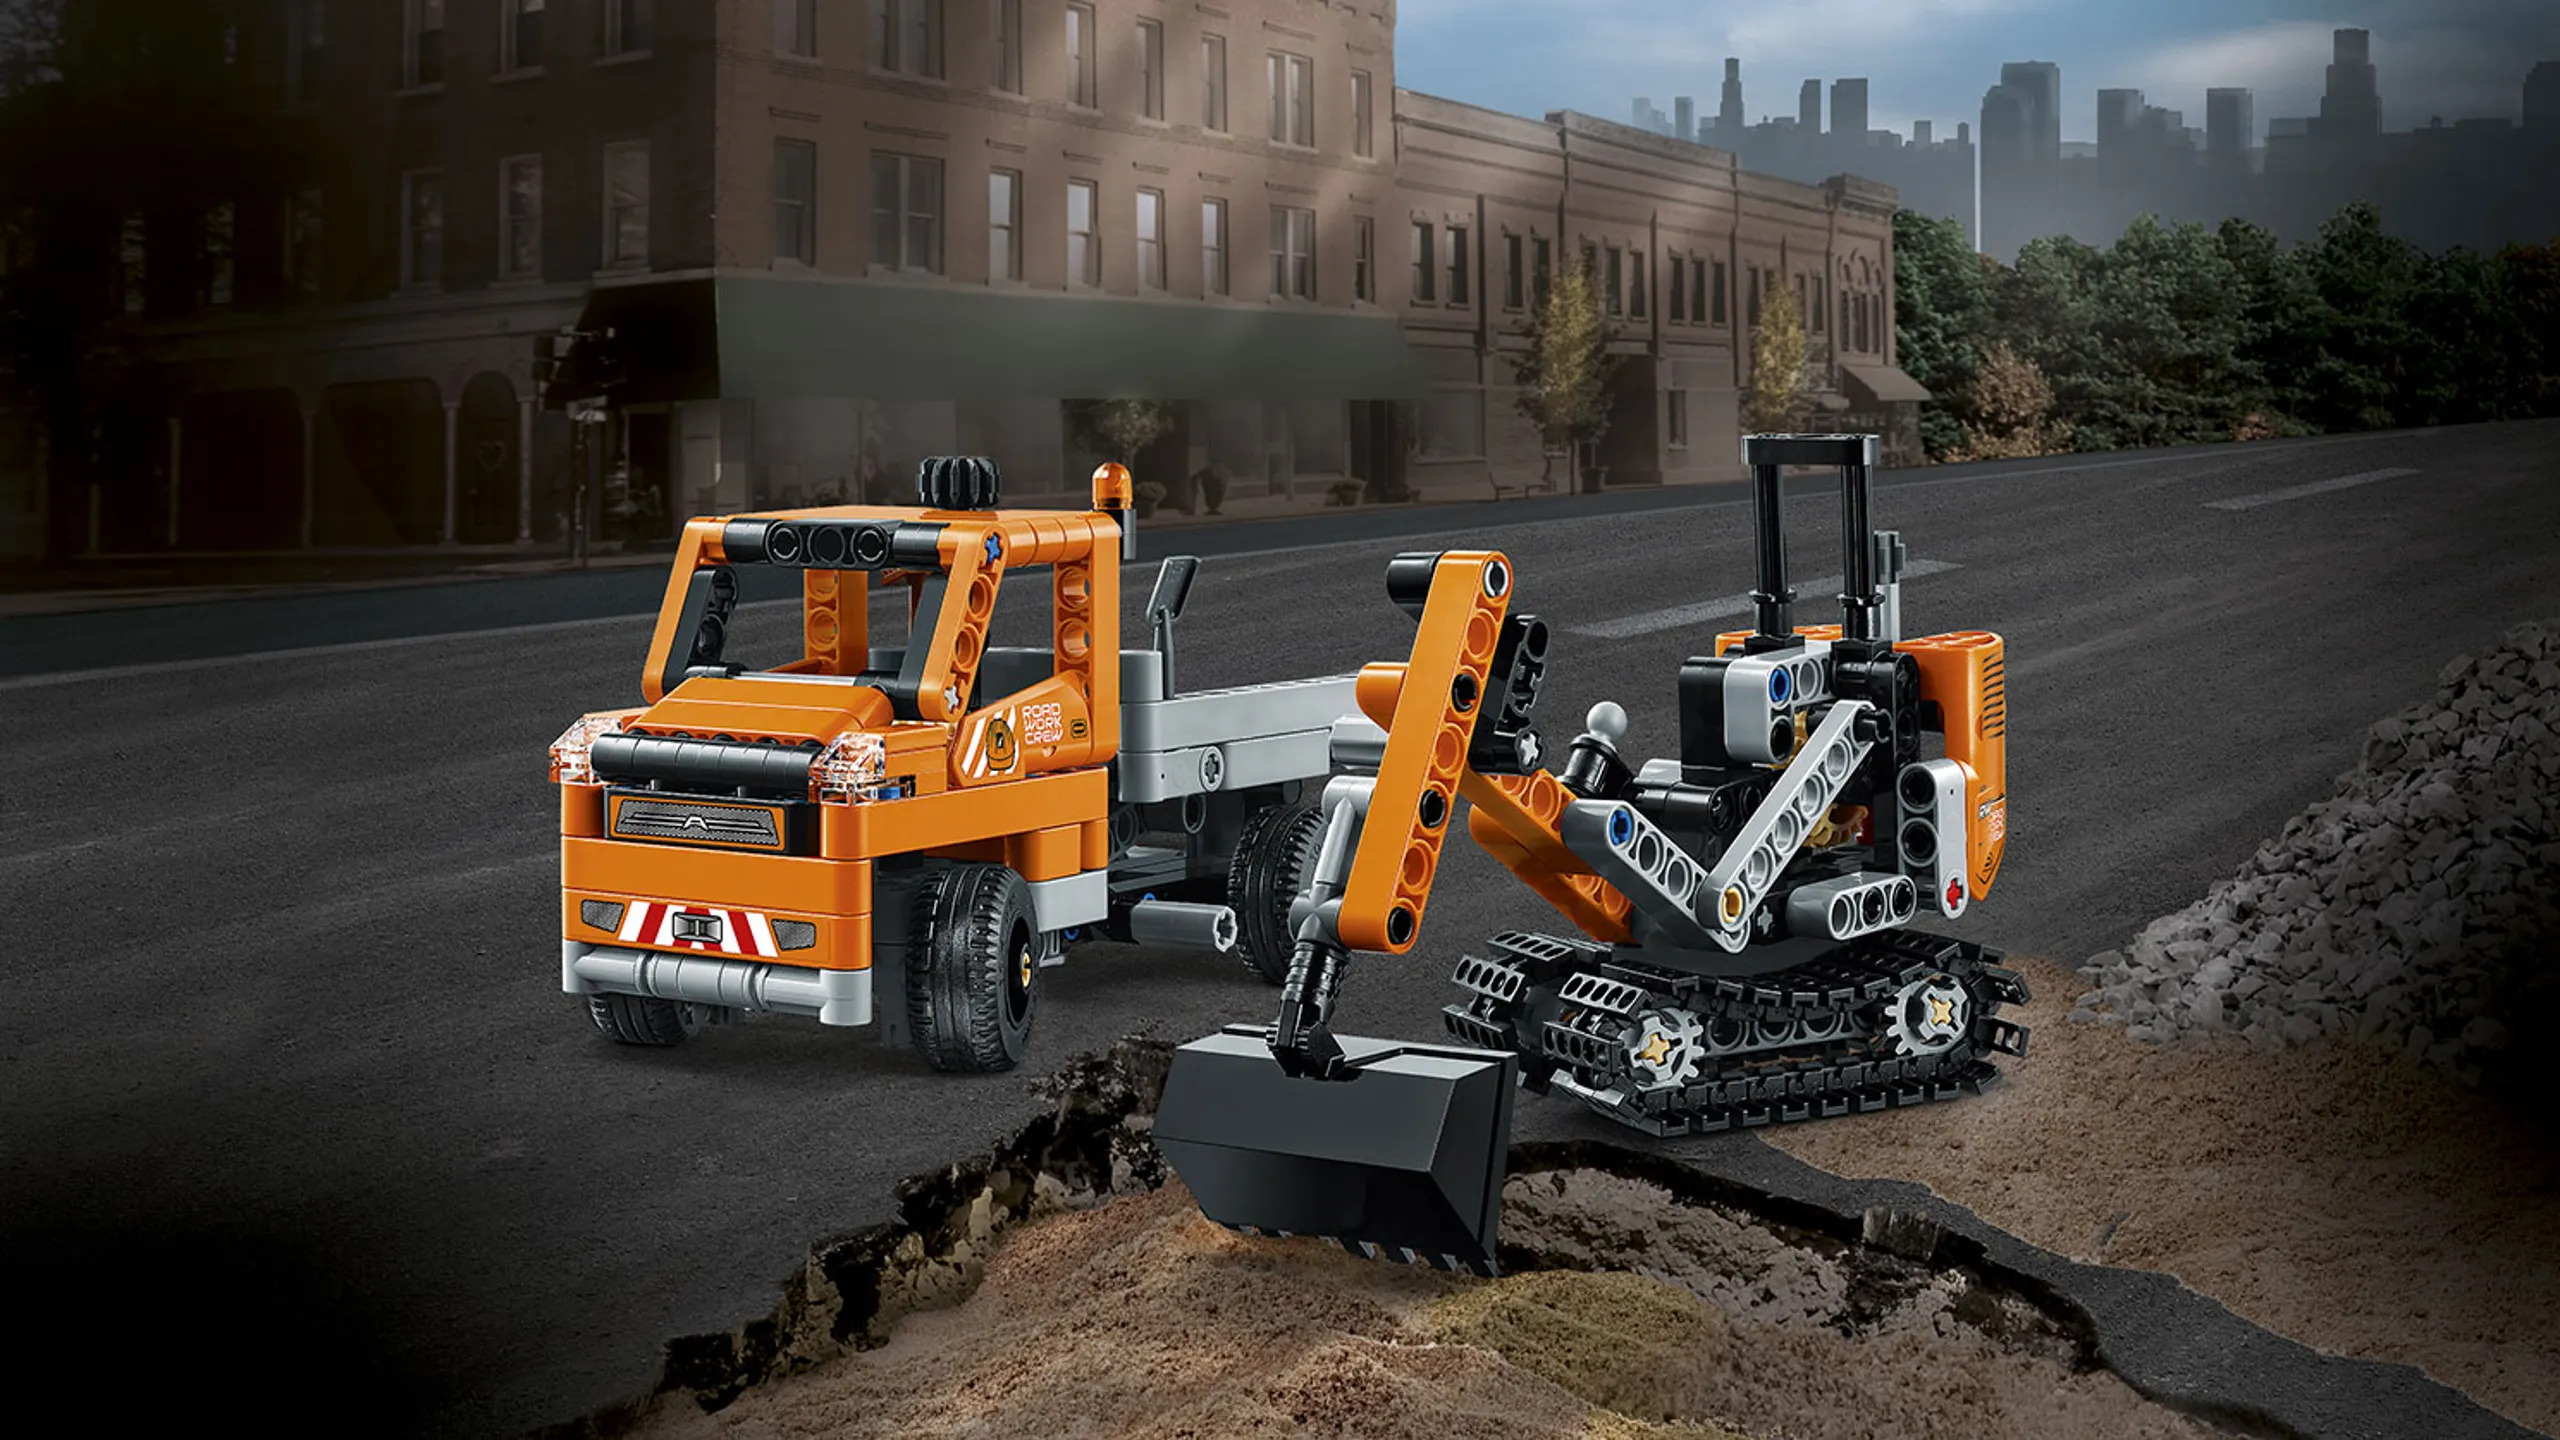 LEGO Technic - 42060 Roadwork Crew -  The set consists of a truck with removable trailer, plus a rugged tracked digger in a classic orange, gray and black color scheme. 